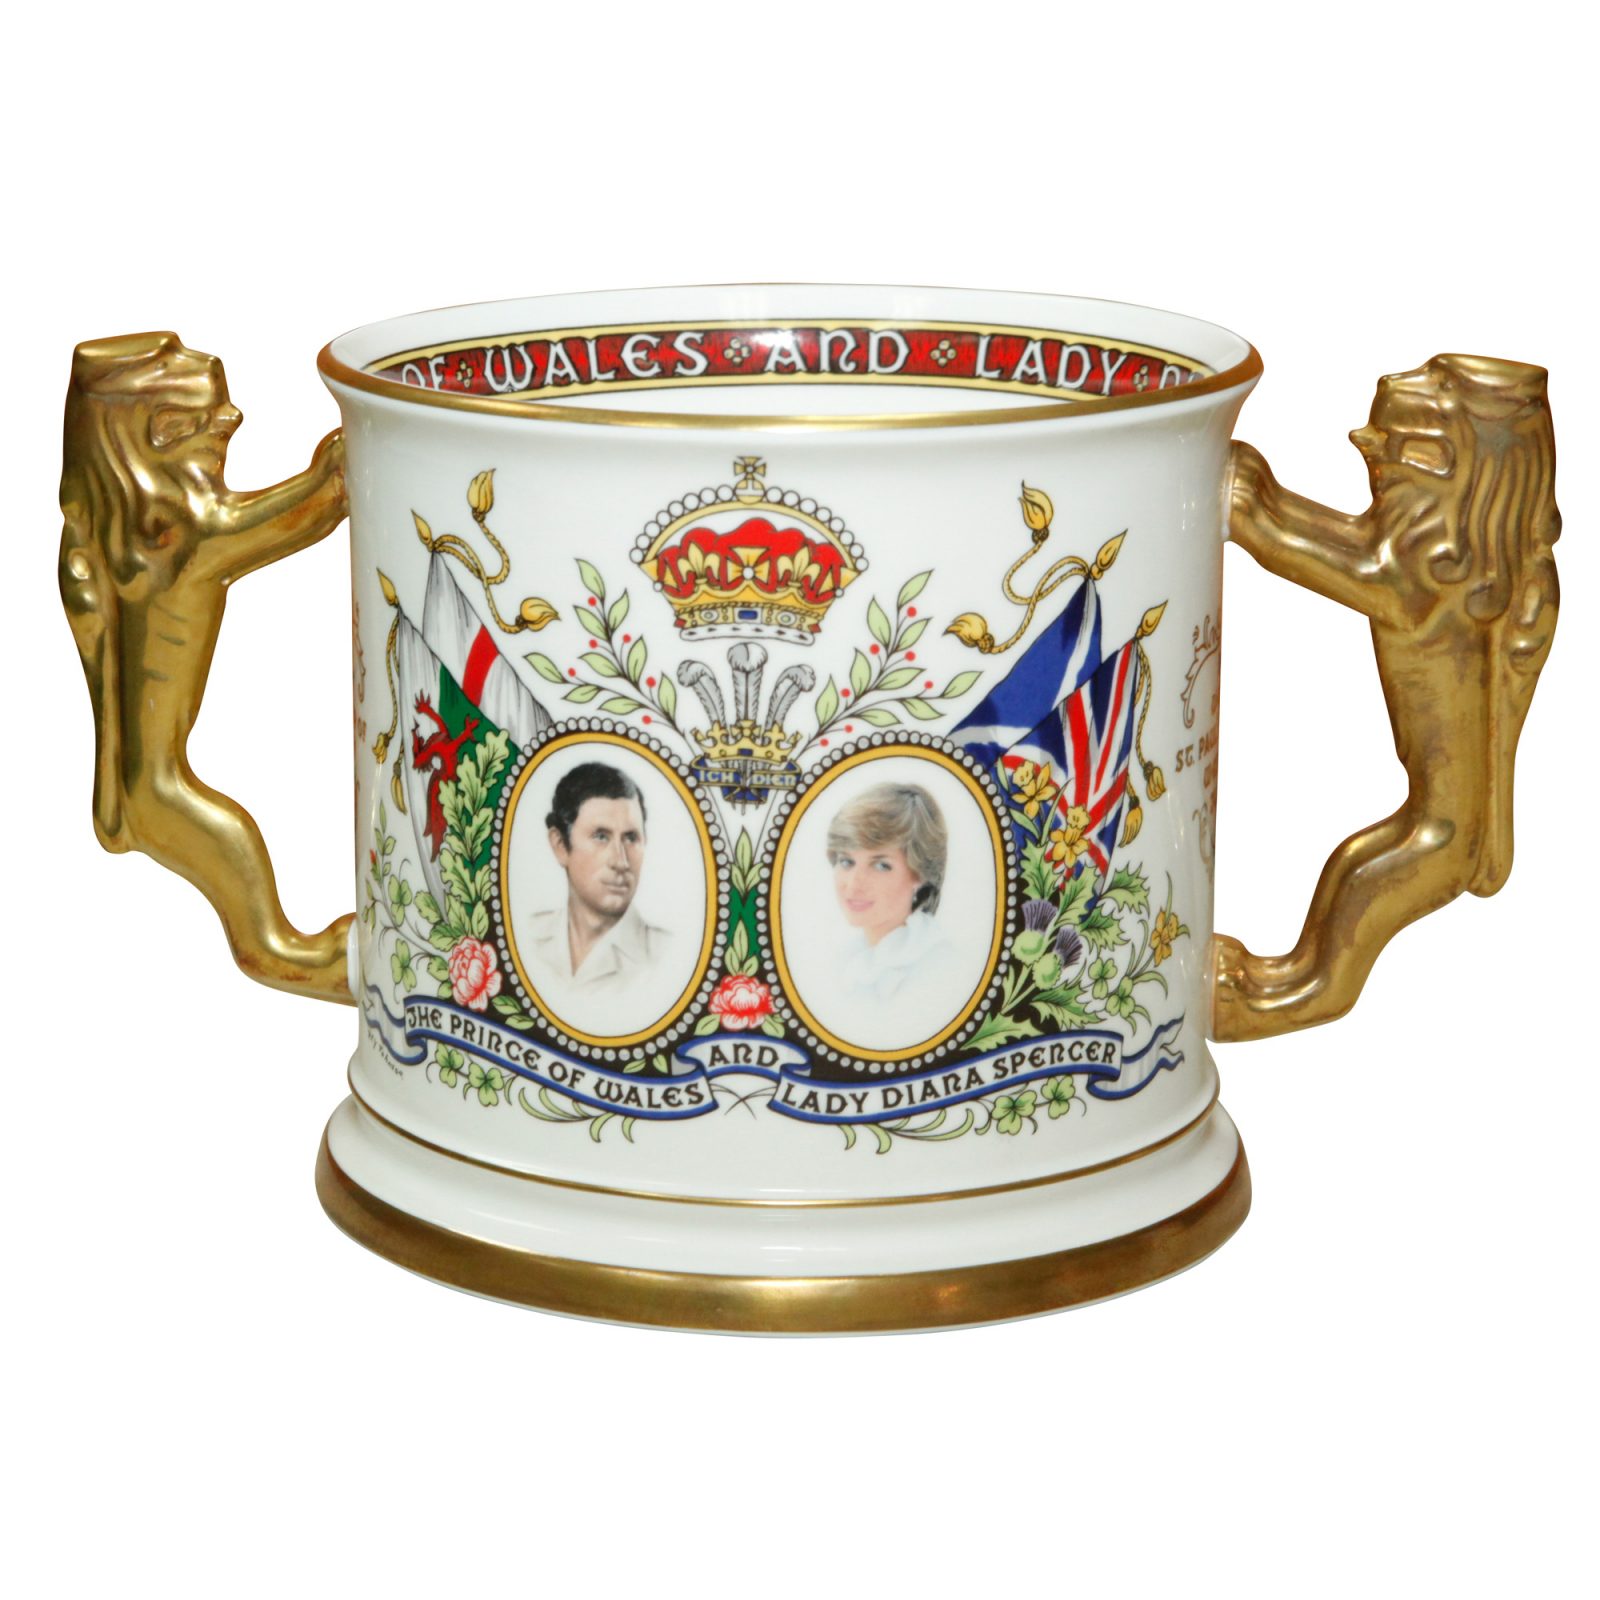 Paragon Loving Cup Marriage Charles D - Paragon Commemorative